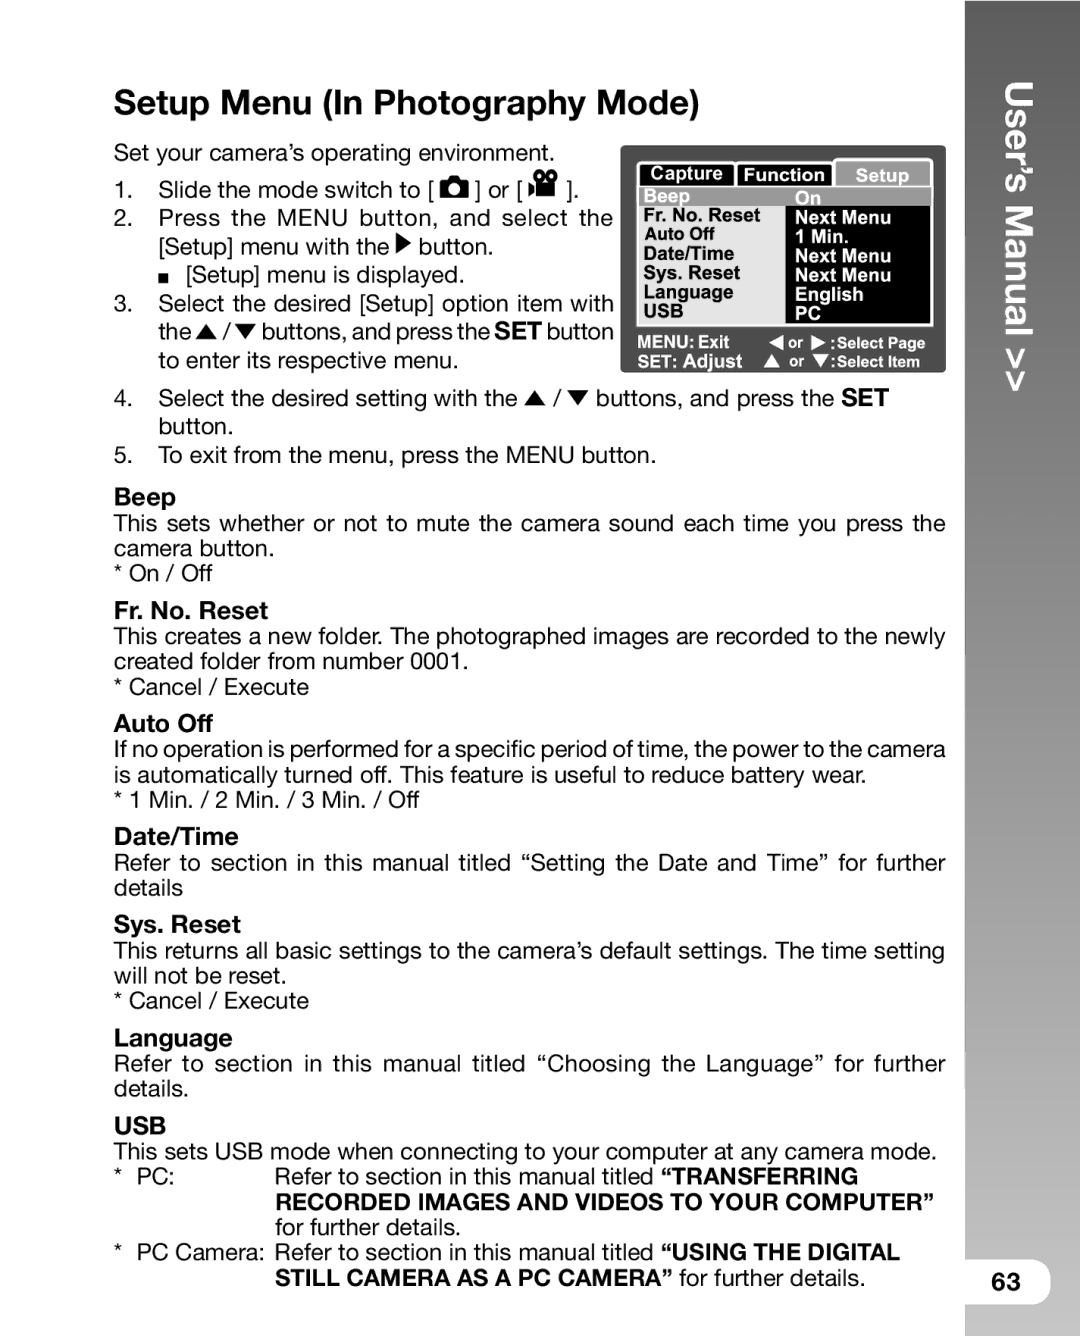 Sealife DC 600 manual Beep, Fr. No. Reset, Auto Off, Date/Time, Sys. Reset, Language 